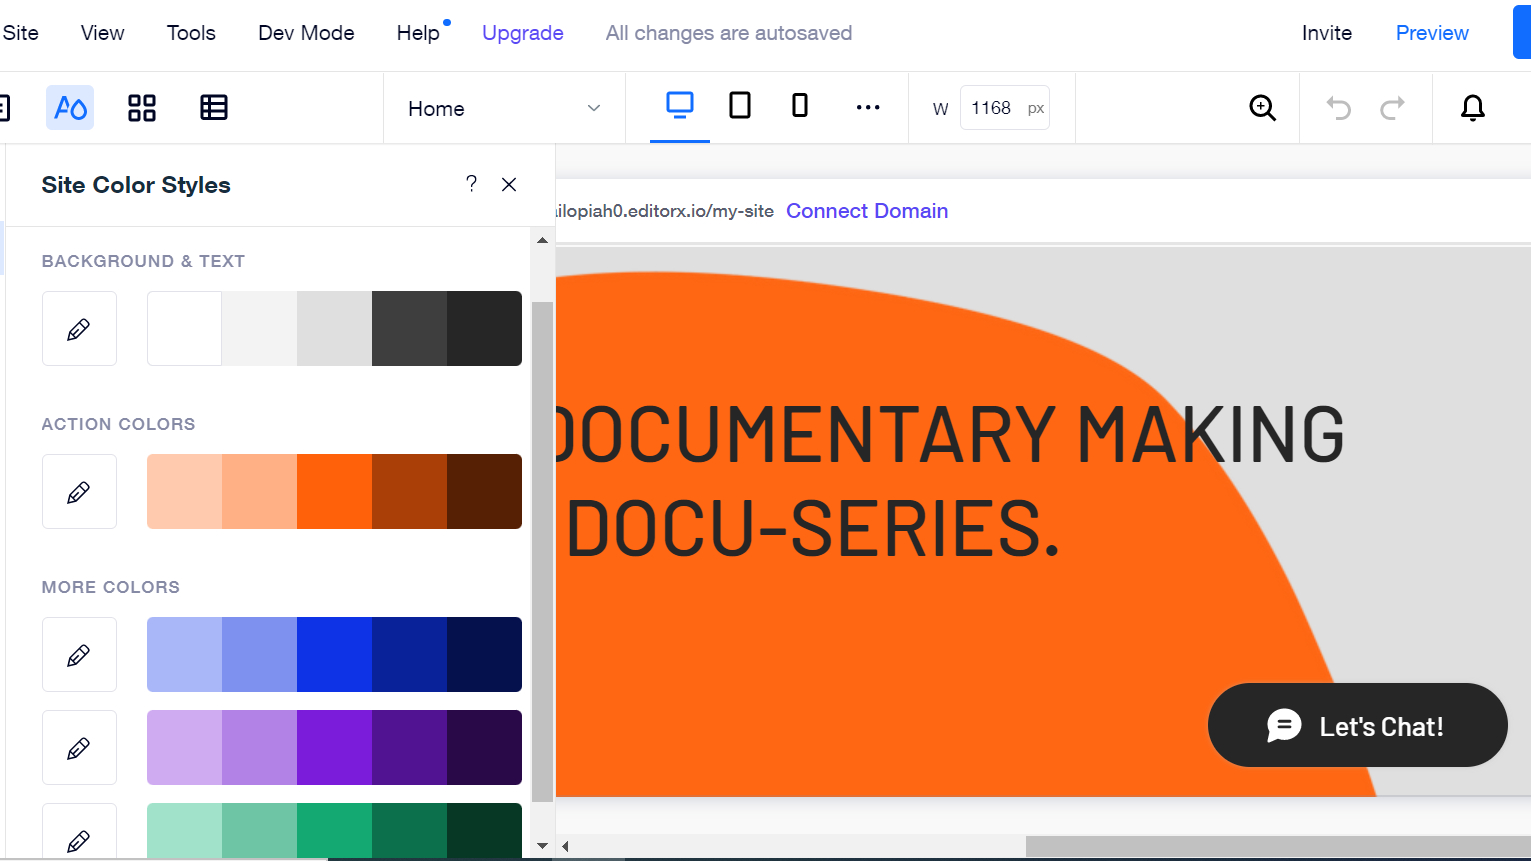 Wix's Editor X comes with a wide range of color themes for your site